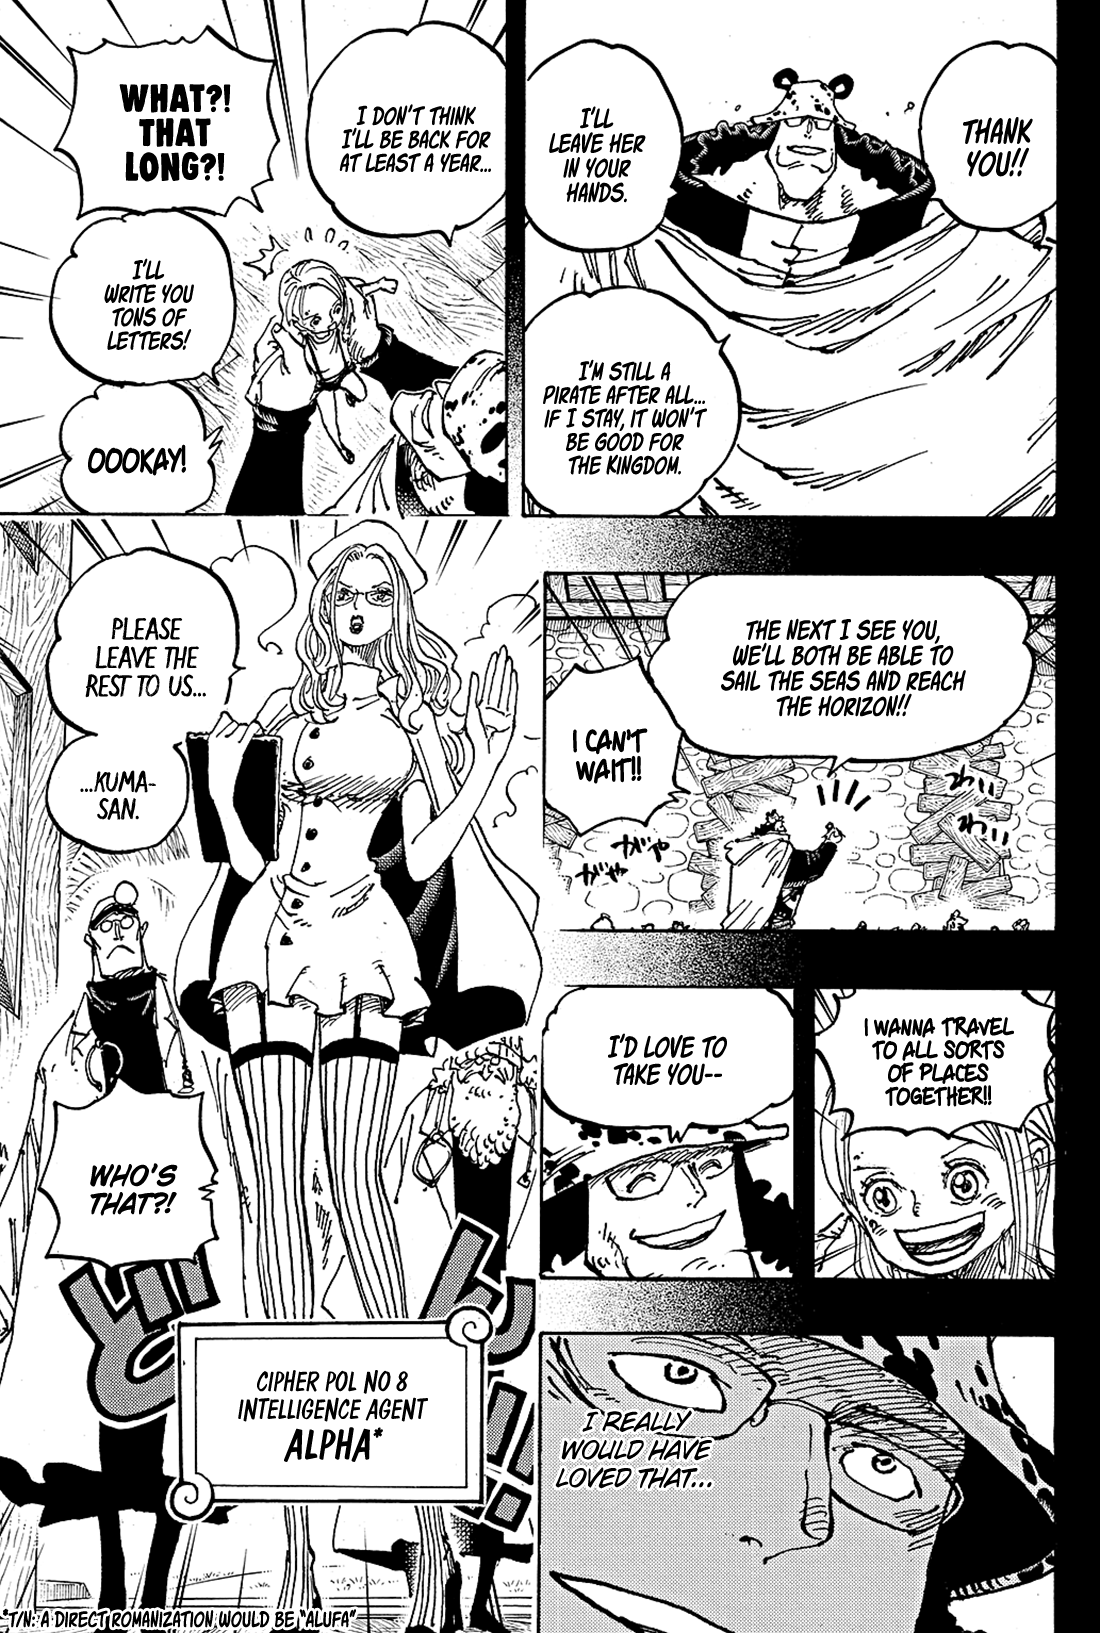 One Piece, Chapter 1100 | TcbScans Org - Free Manga Online in High 